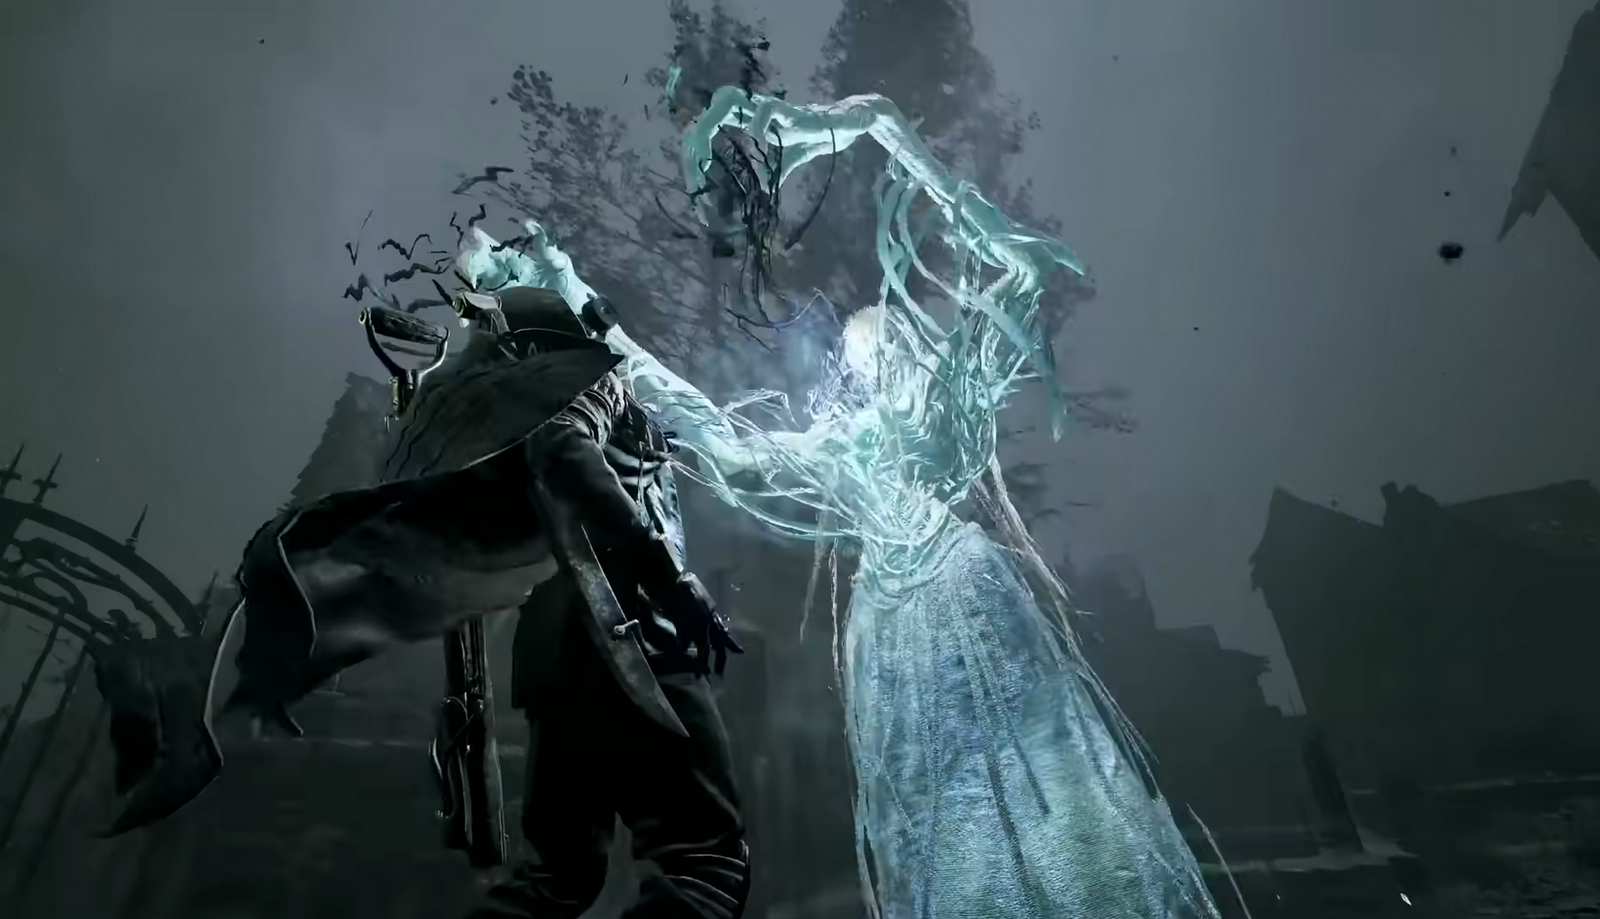 The Night Weaver boss in Remnant 2